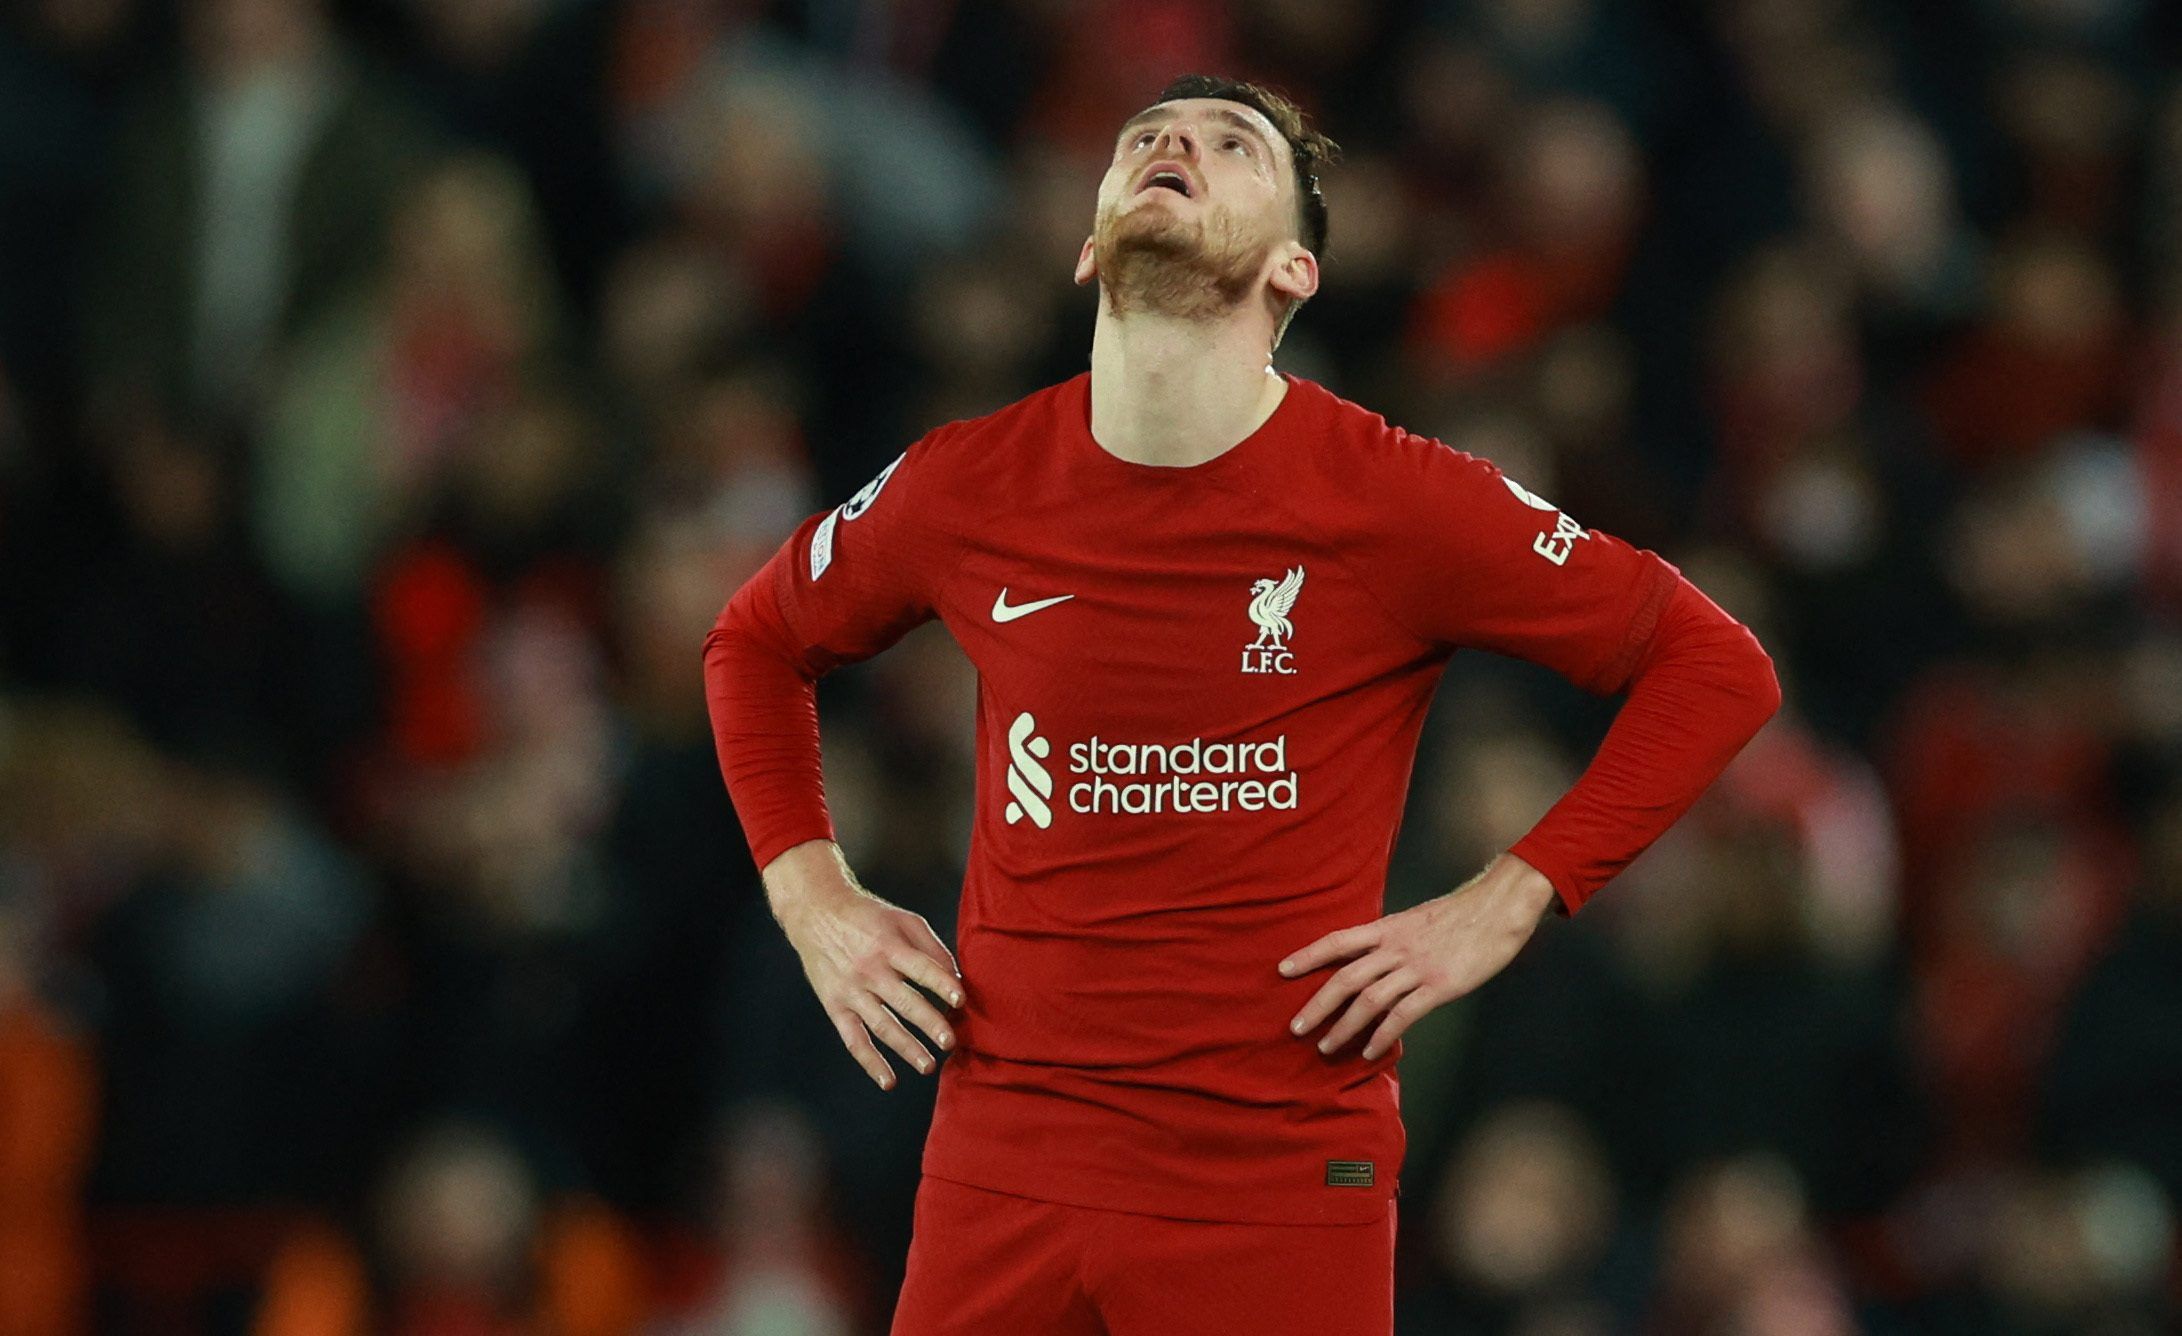 Champions League, Liverpool, Liverpool news, Liverpool latest news, Liverpool analysis, Liverpool vs Real Madrid, Liverpool update, Liverpool performance, LFC news, LFC latest news, LFC update, LFC analysis, LFC performance, Andrew Robertson, Jurgen Klopp, Anfield, FSG